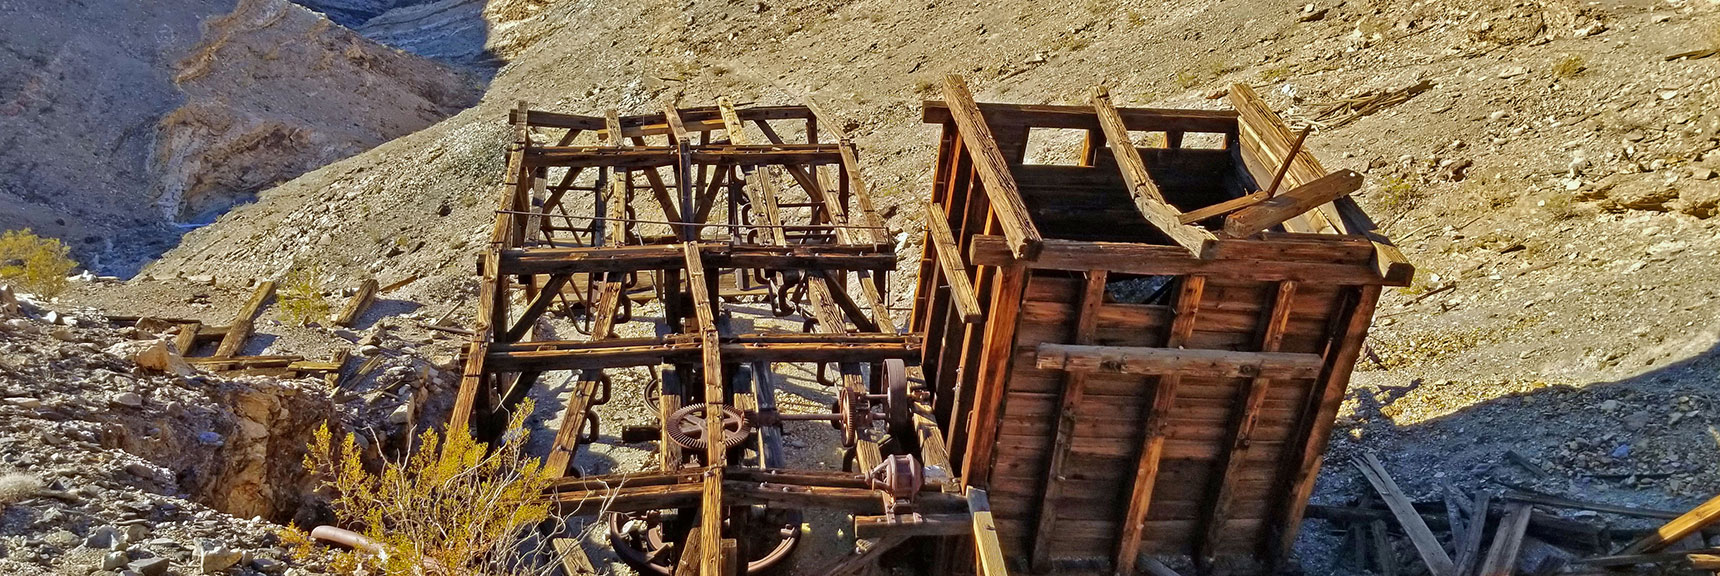 Upper Stamp Mill from Above | Keane Wonder Mine | Death Valley National Park, California